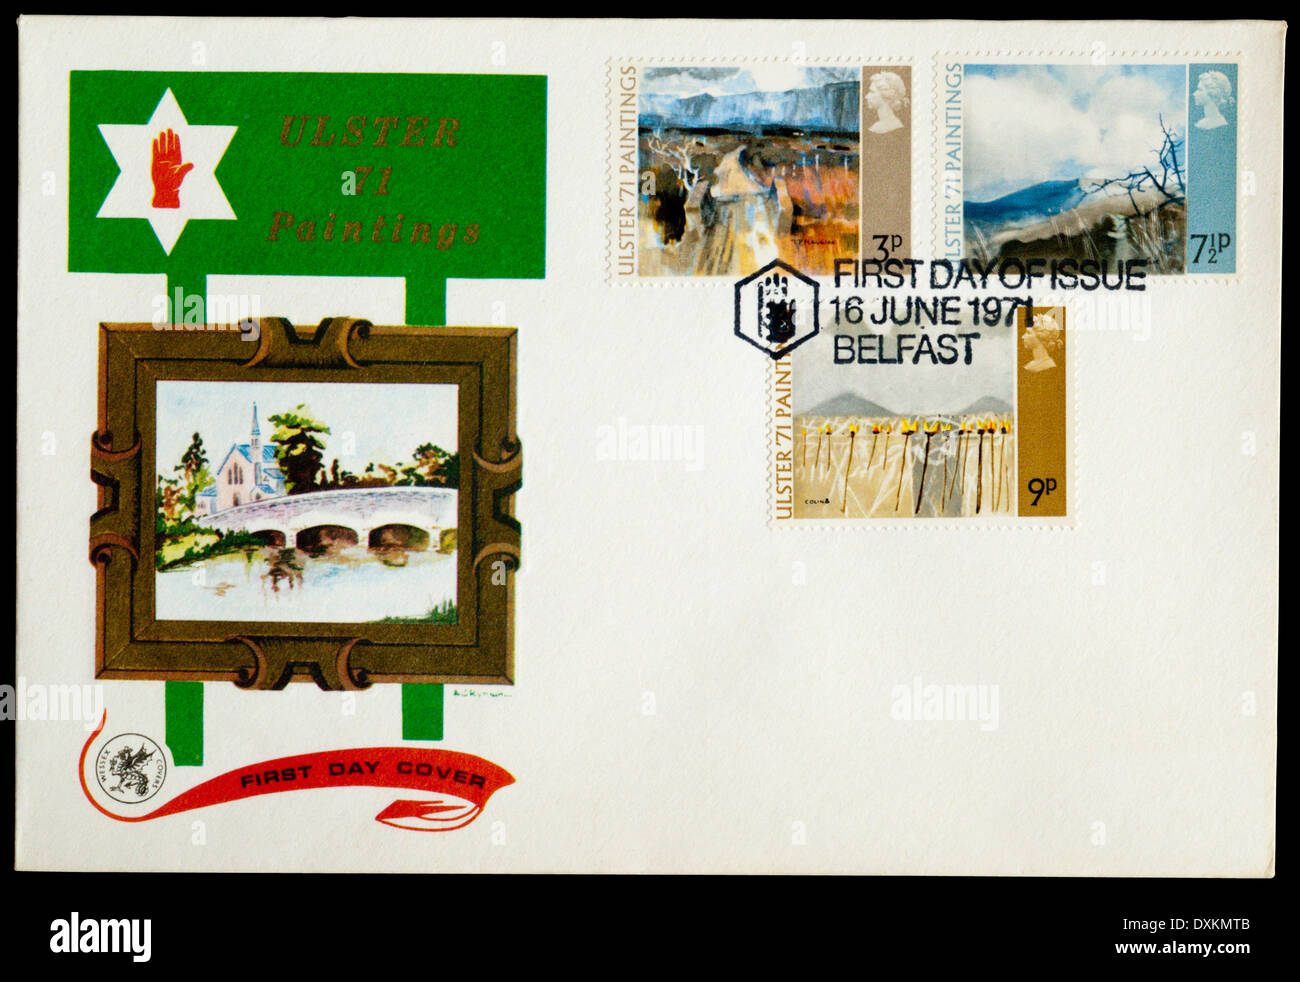 1971 First Day Cover celebrating Ulster Paintings, postmarked in Belfast. Stock Photo